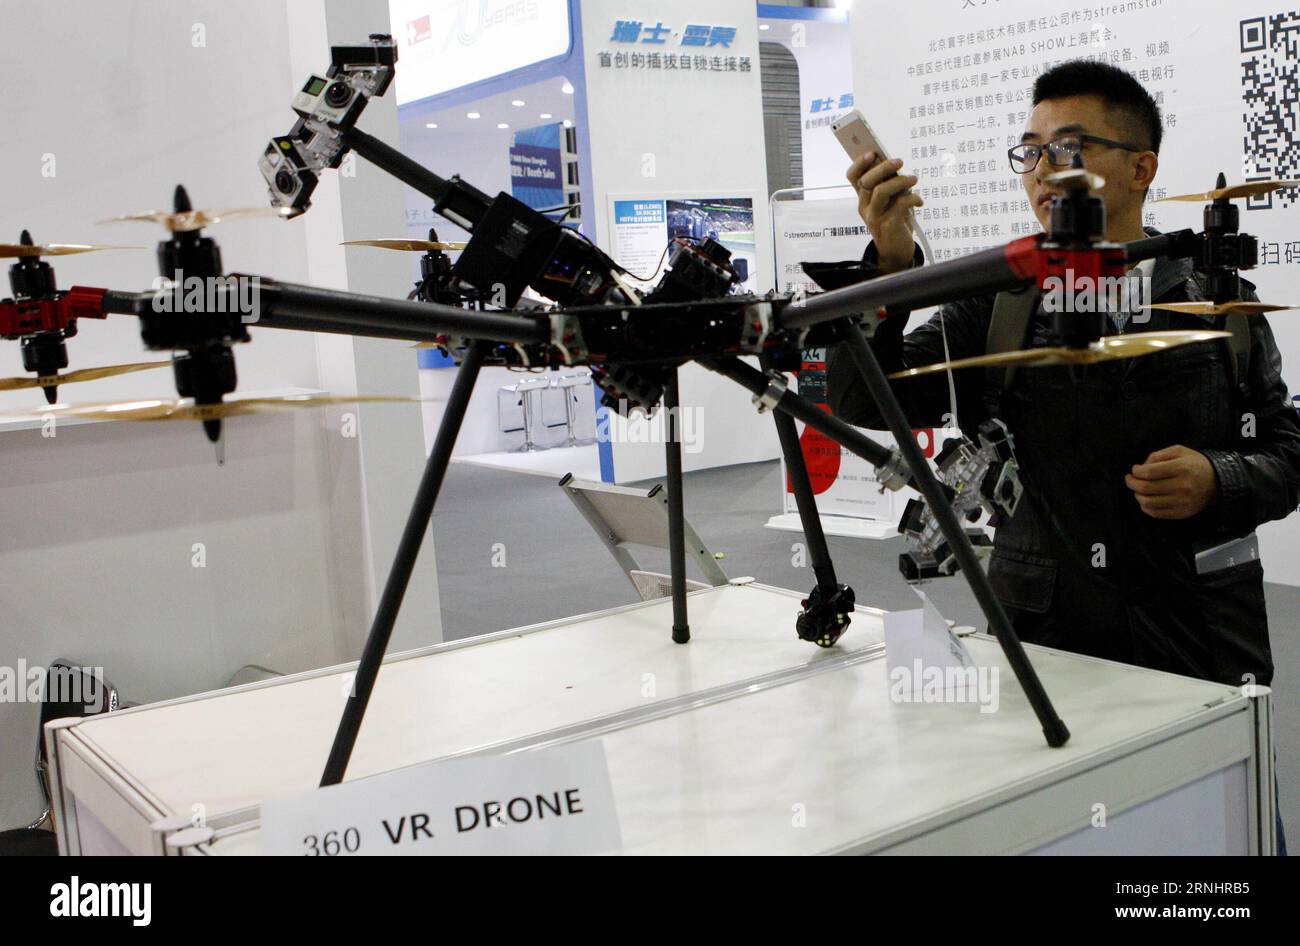 (161207) -- SHANGHAI, Dec. 7, 2016 -- A visitor takes photos of a 360 VR drone at the National Association of Broadcasters (NAB) Show Shanghai held in east China s Shanghai, Dec. 7, 2016. Building on the strength and success of the NAB Show brand and its global influence, Shanghai s show is the premier event for the broadcast and transmedia industry in the Asia and Pacific region. ) (wx) CHINA-SHANGHAI-NAB SHOW (CN) FangxZhe PUBLICATIONxNOTxINxCHN   Shanghai DEC 7 2016 a Visitor Takes Photos of a 360 VR Drone AT The National Association of Broadcasters NAB Show Shanghai Hero in East China S Sh Stock Photo